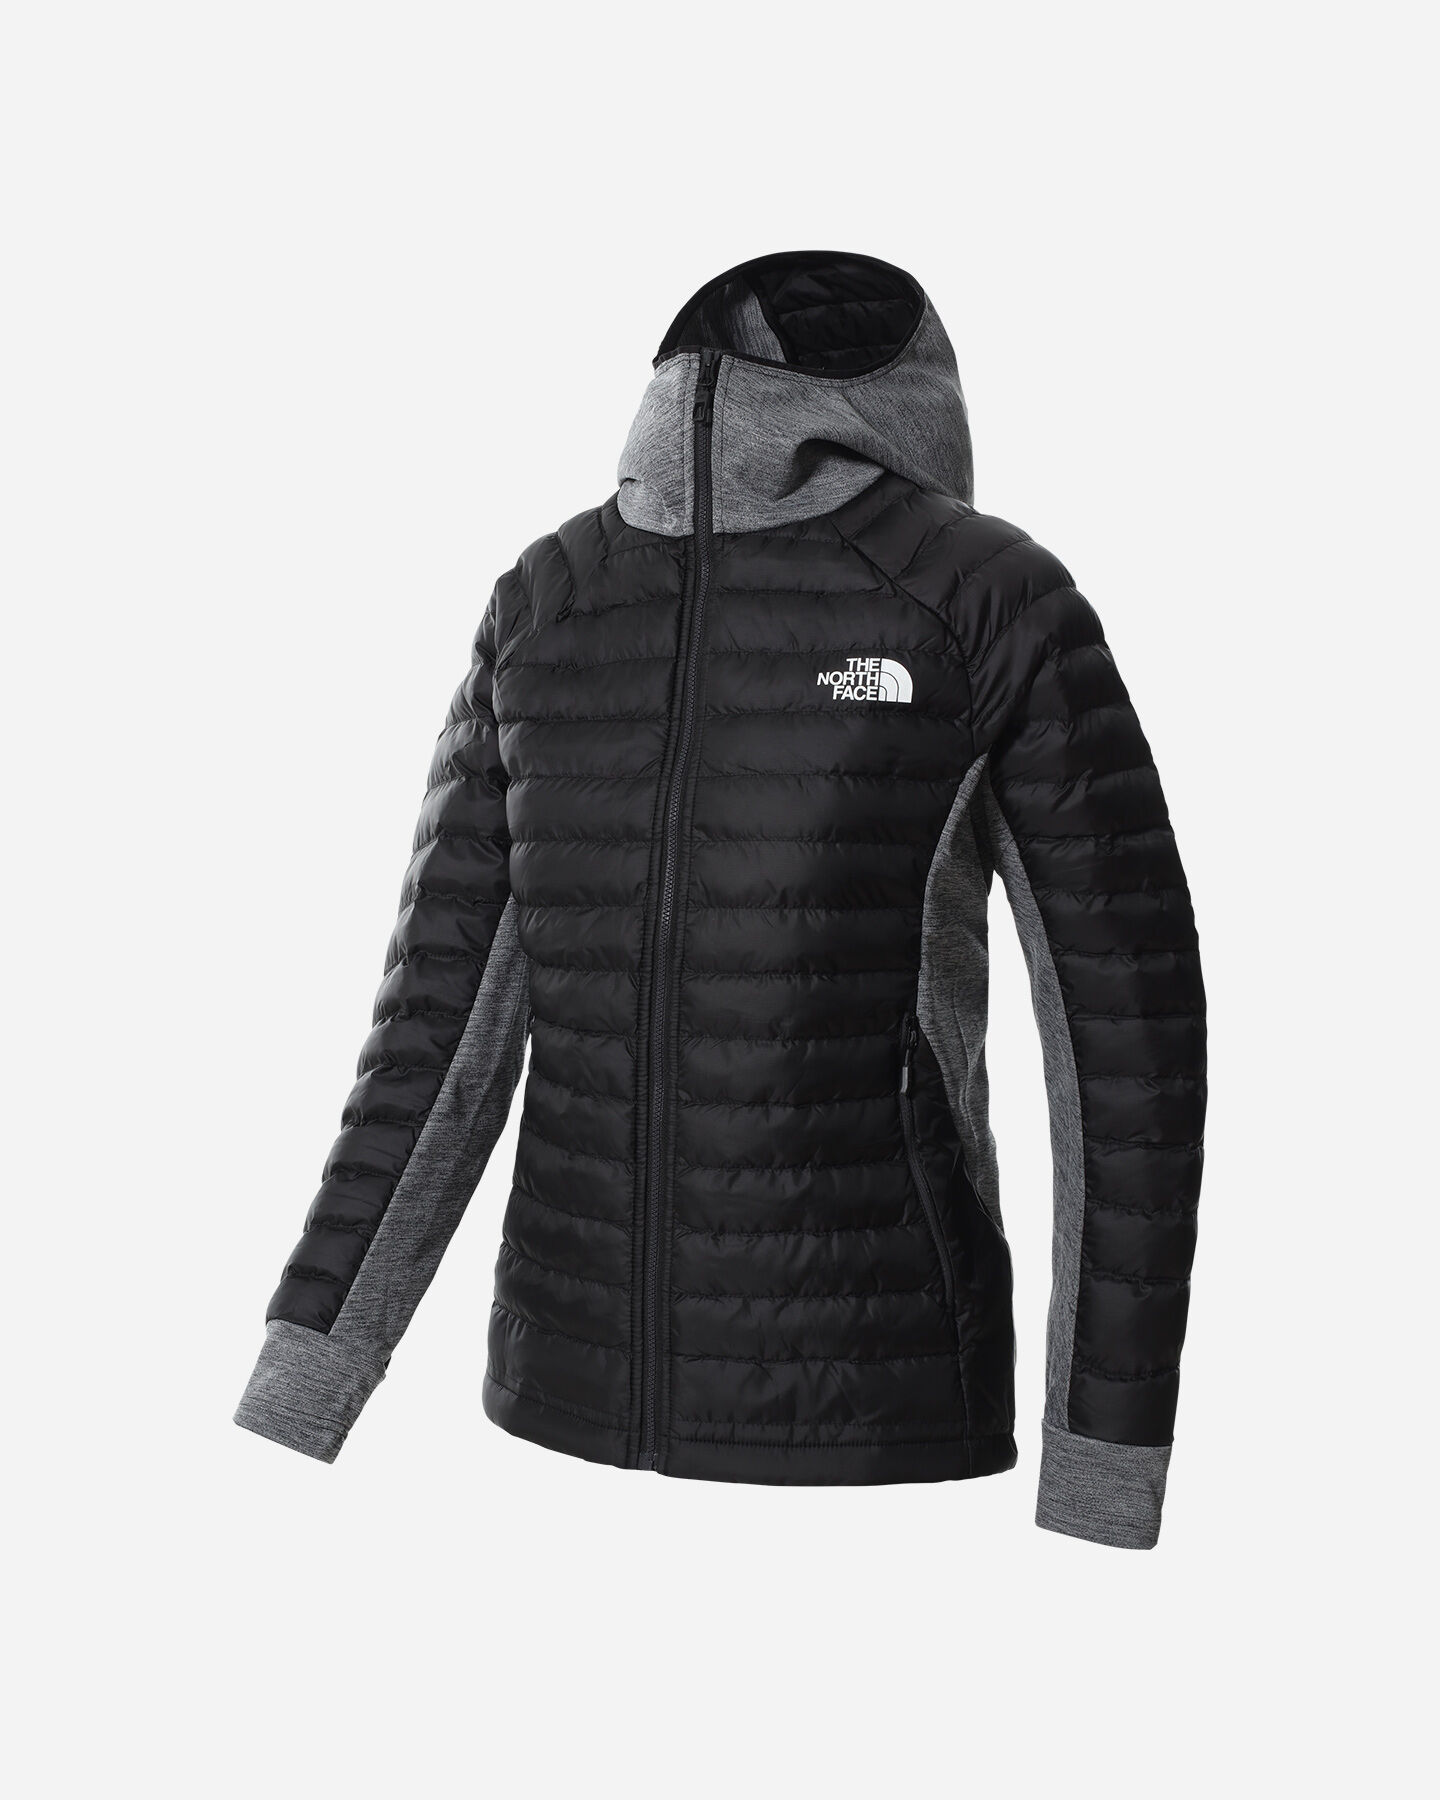  Giacca outdoor THE NORTH FACE  HYBRID INSULATION W S5423040|43M|S scatto 0